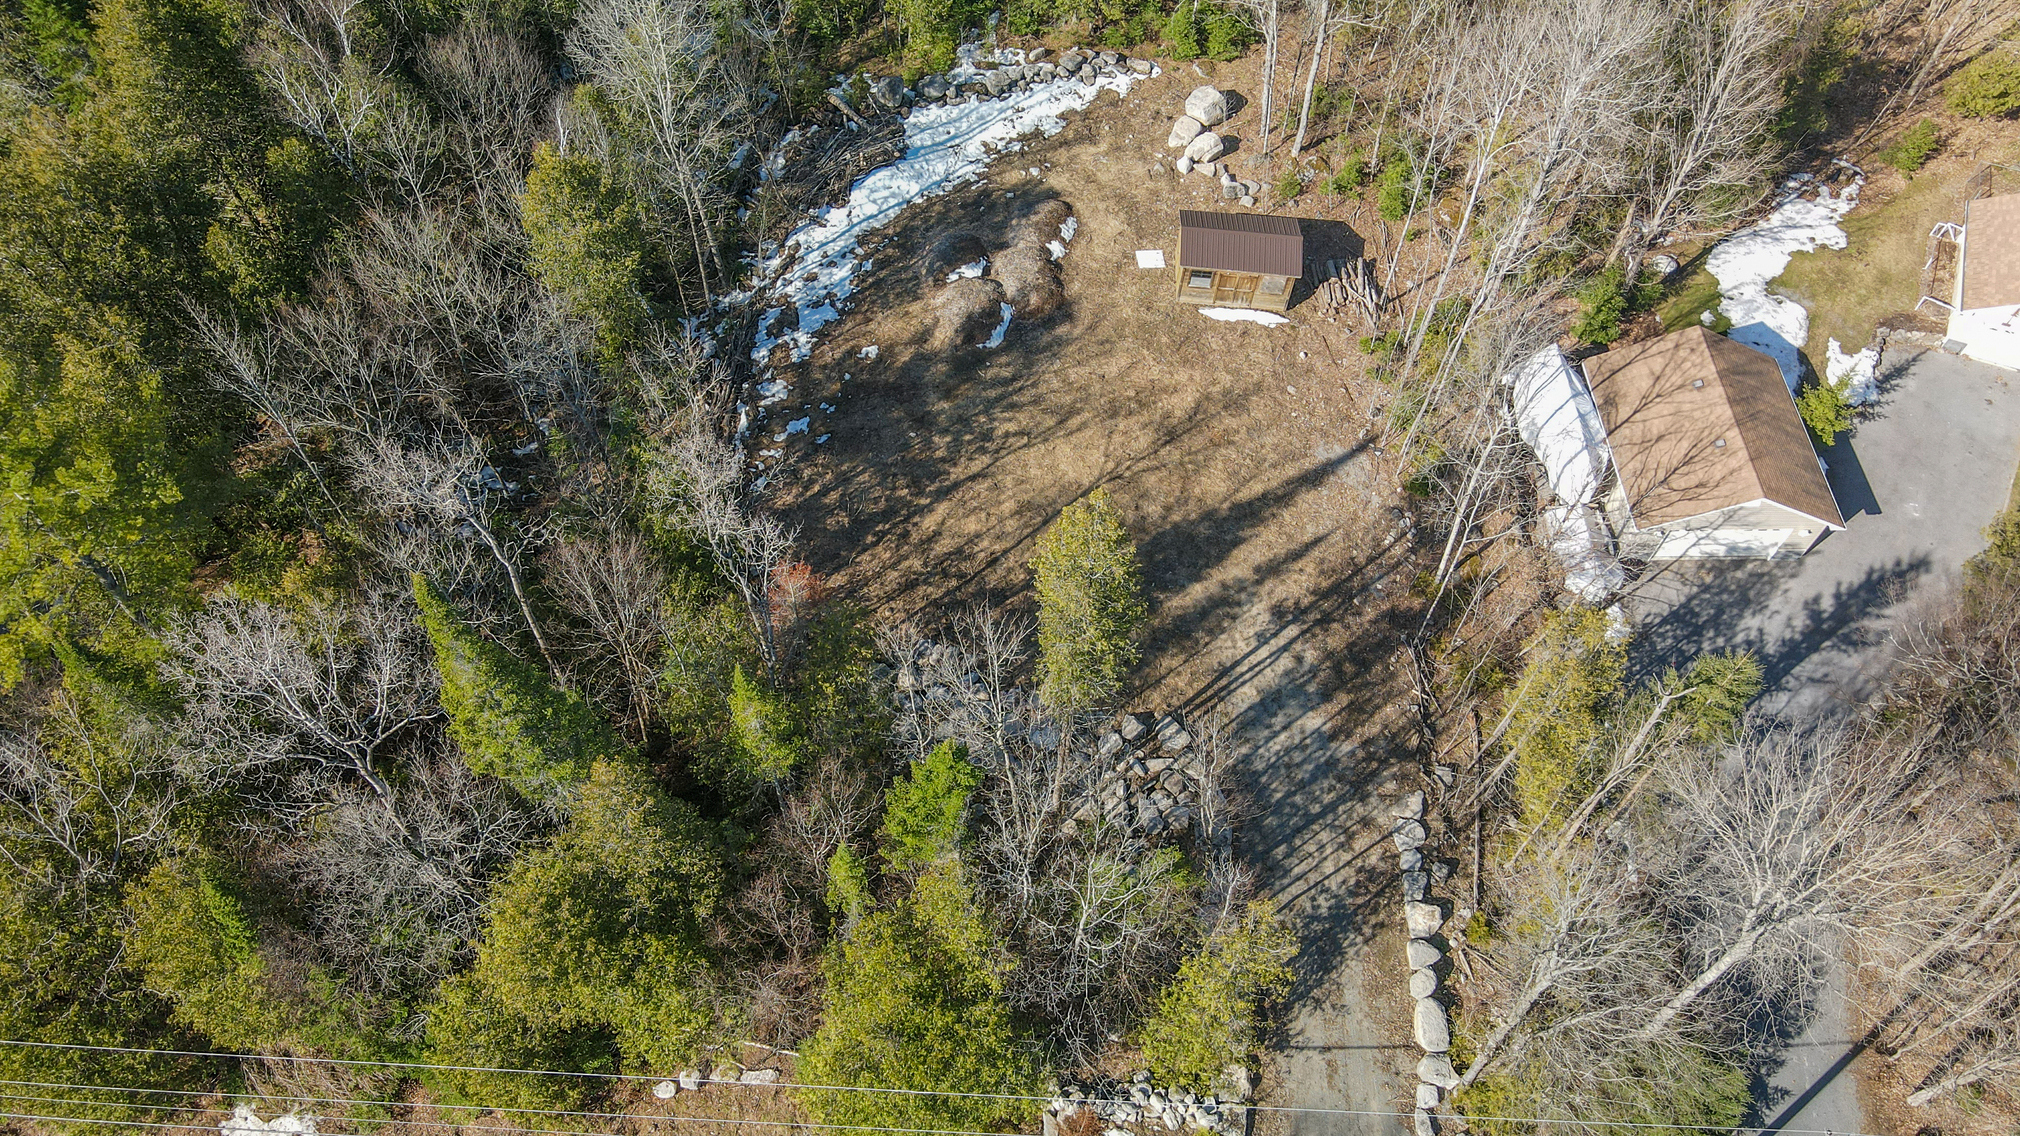 Bird's eye view of vacant lot, with a driveway and a small wooden shed at the back of the lot.